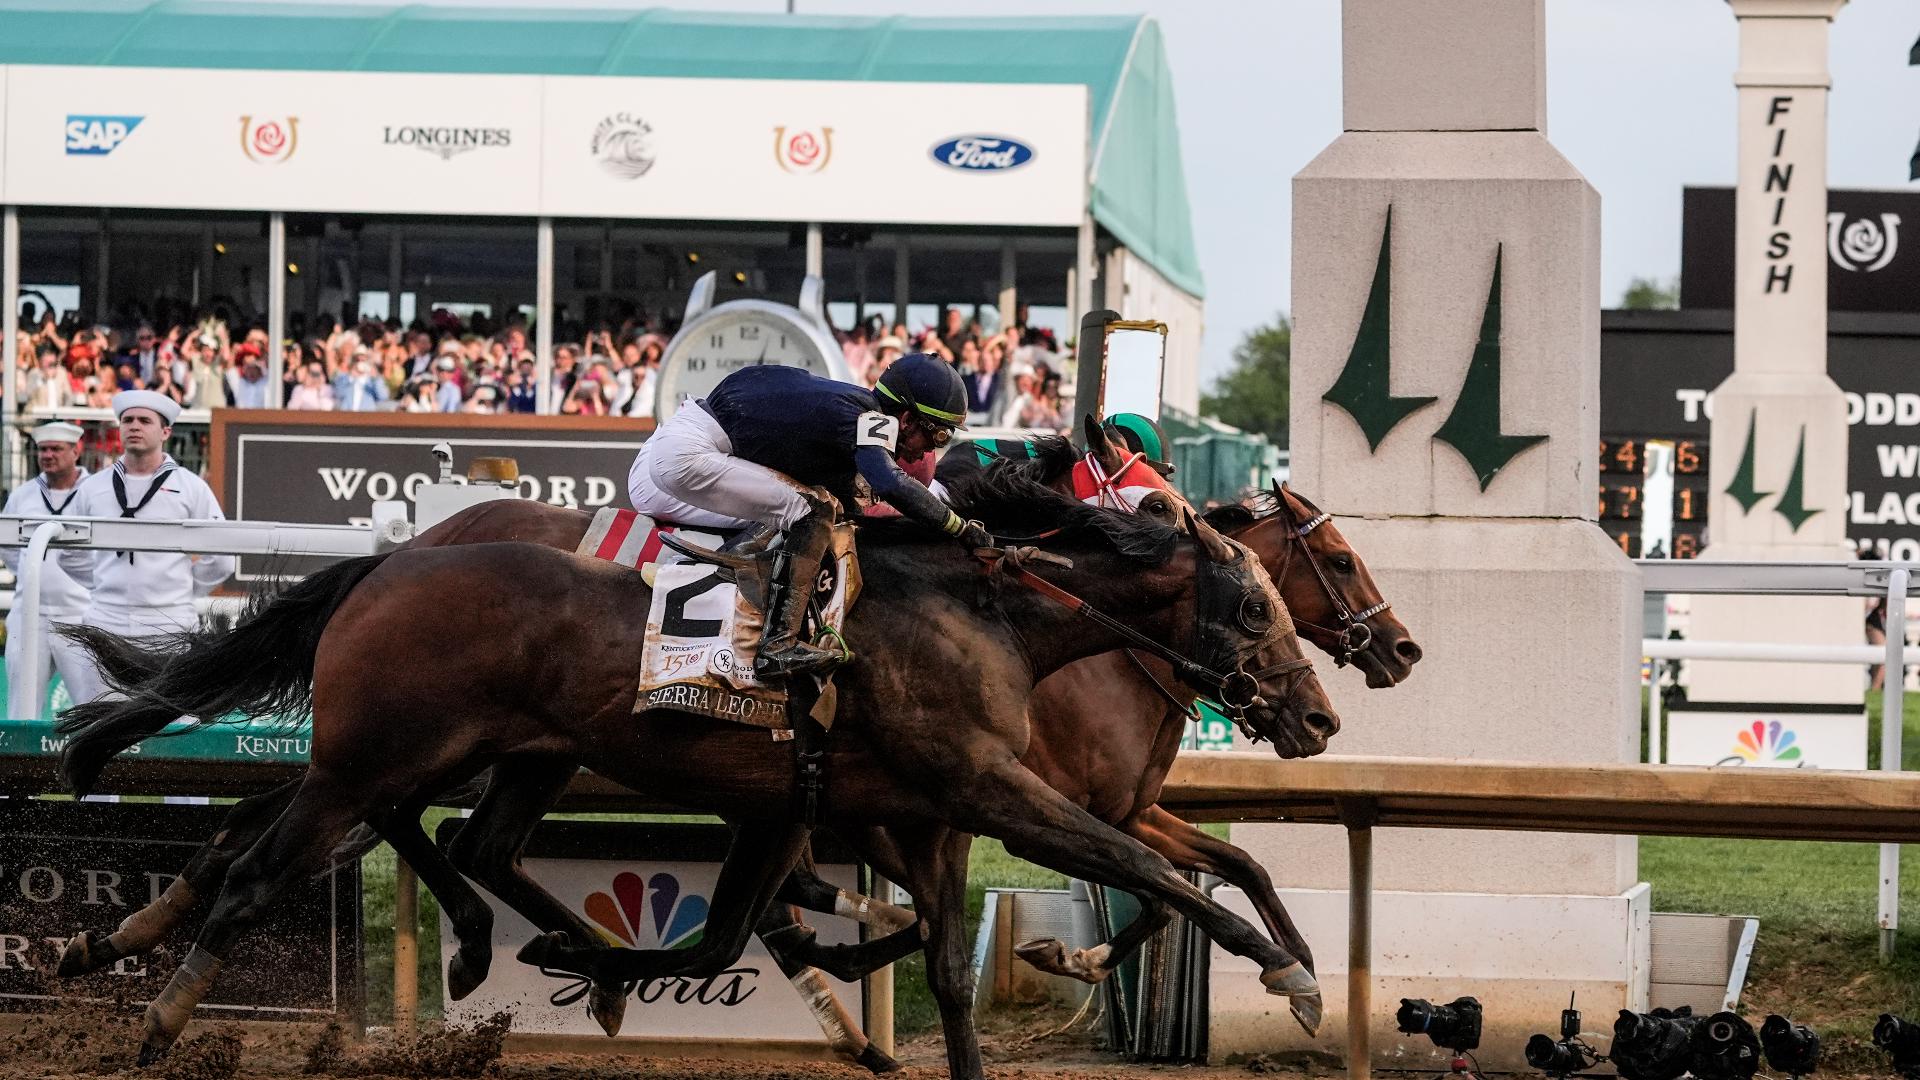 Churchill Downs played host to the 150th Run for the Roses Saturday. Here's what happened.